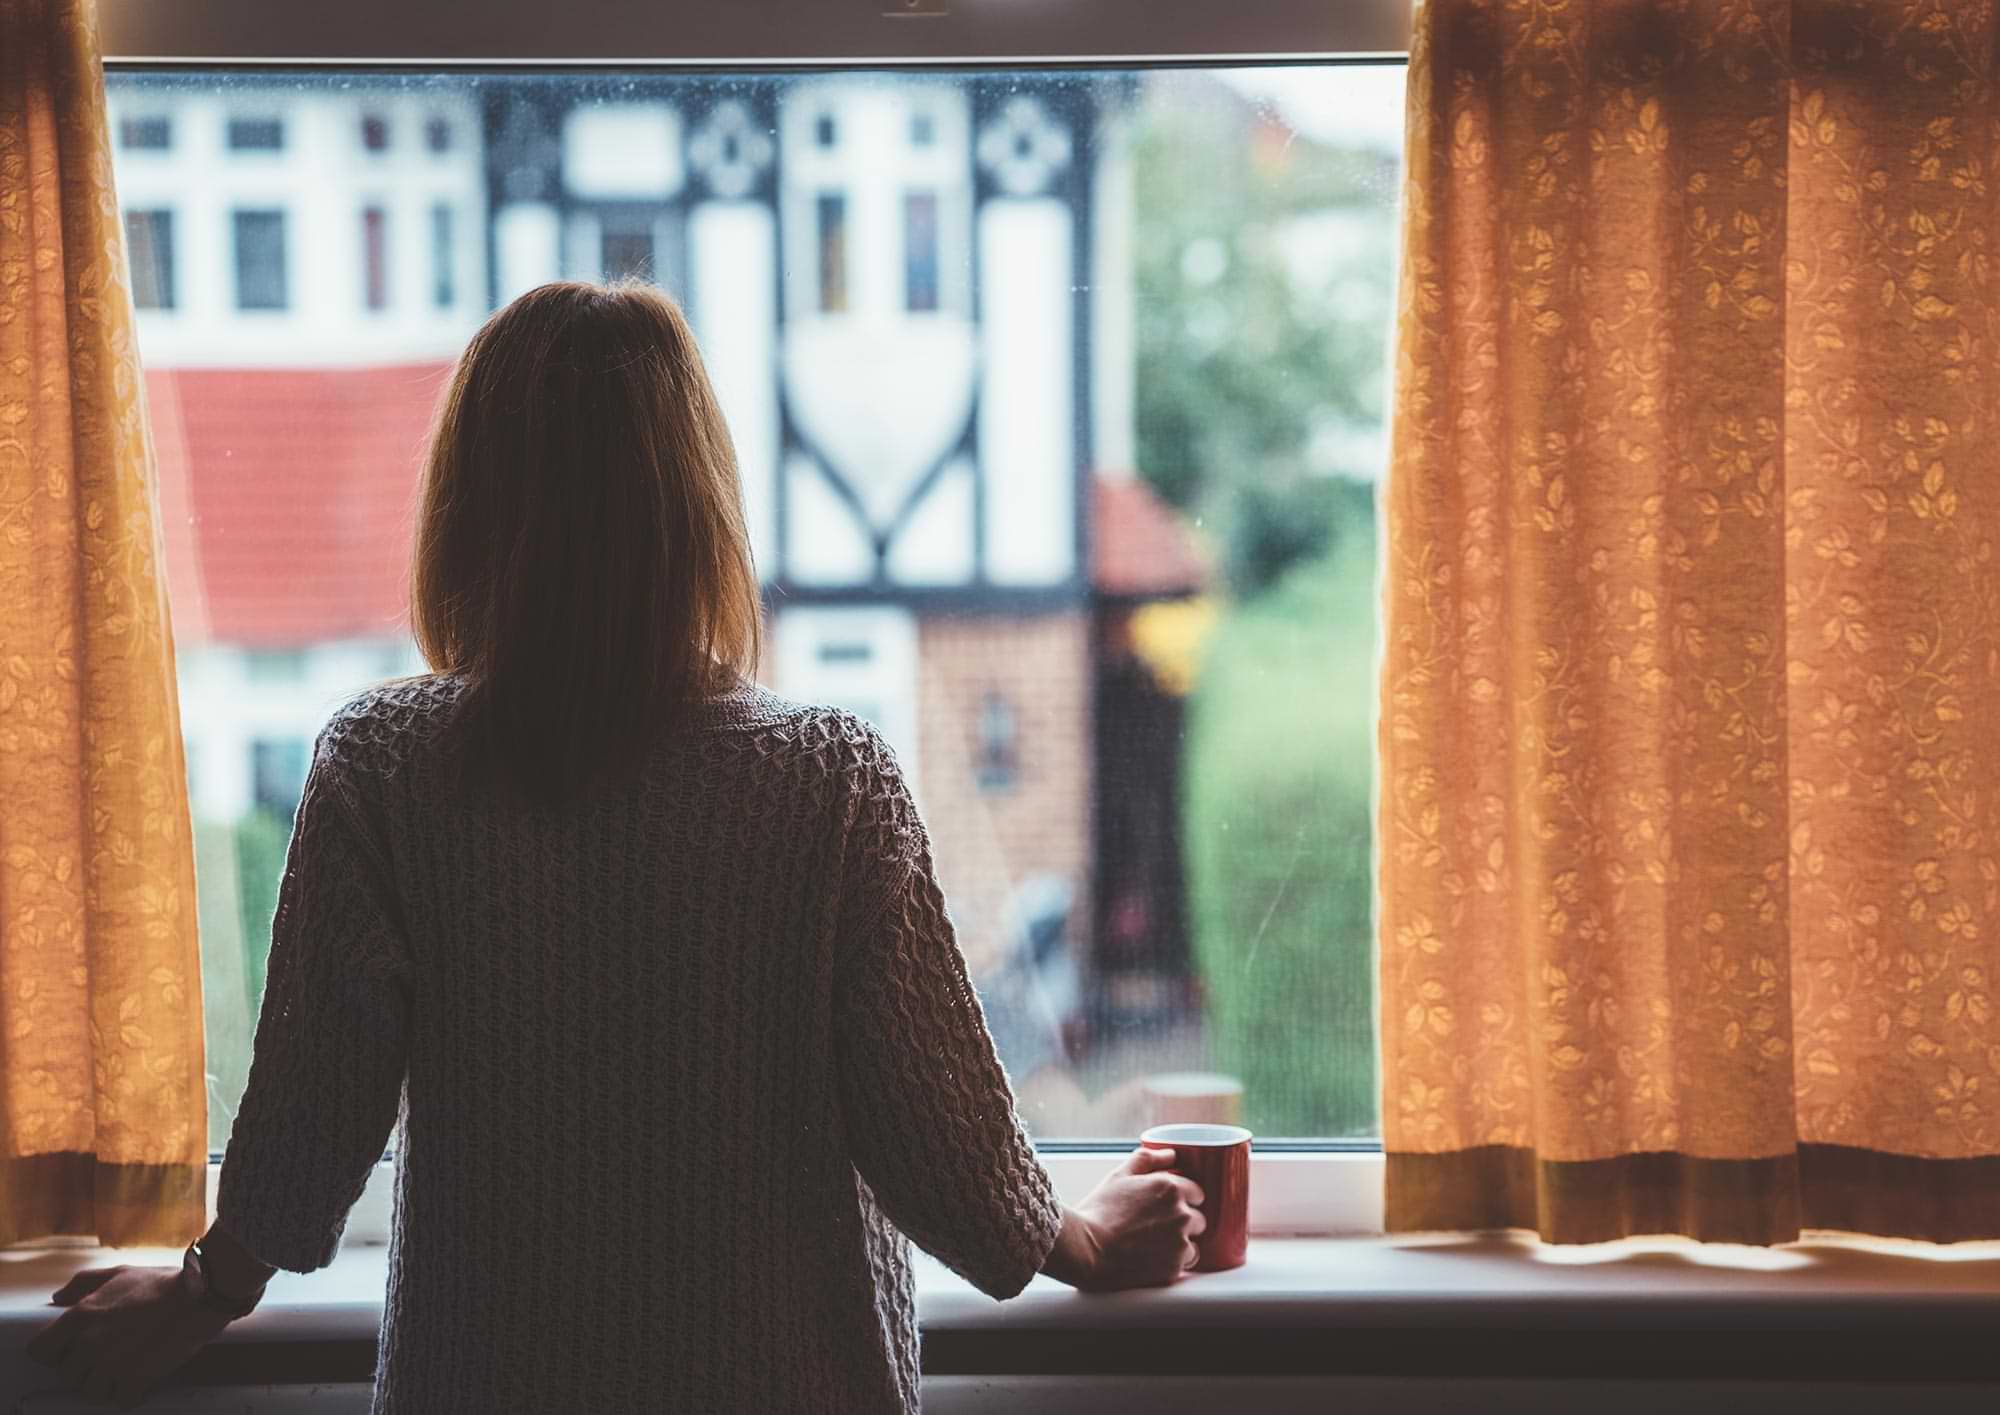 back view of a woman looking out a window, grasping a mug in one hand